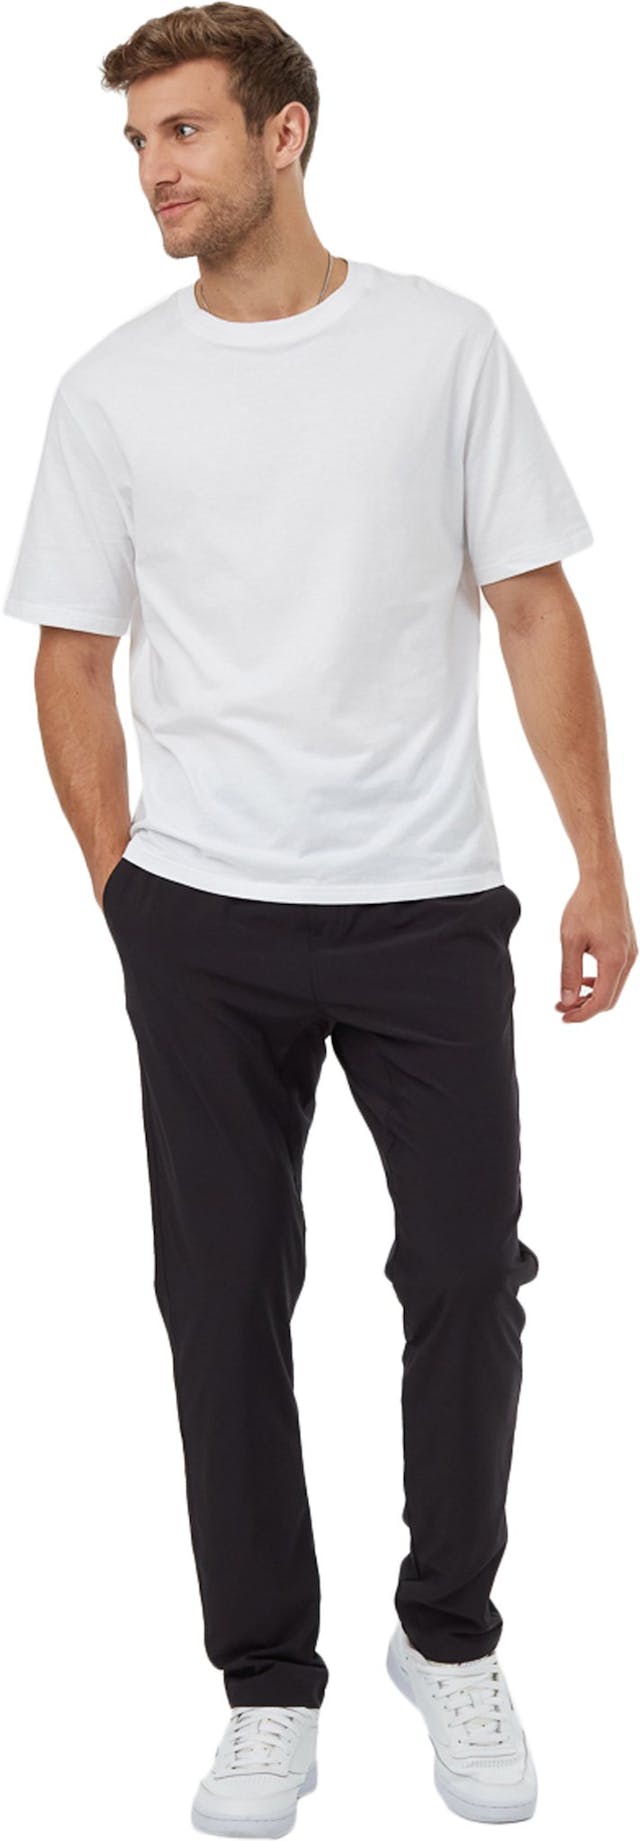 Product image for InMotion Pant Lined - Men's